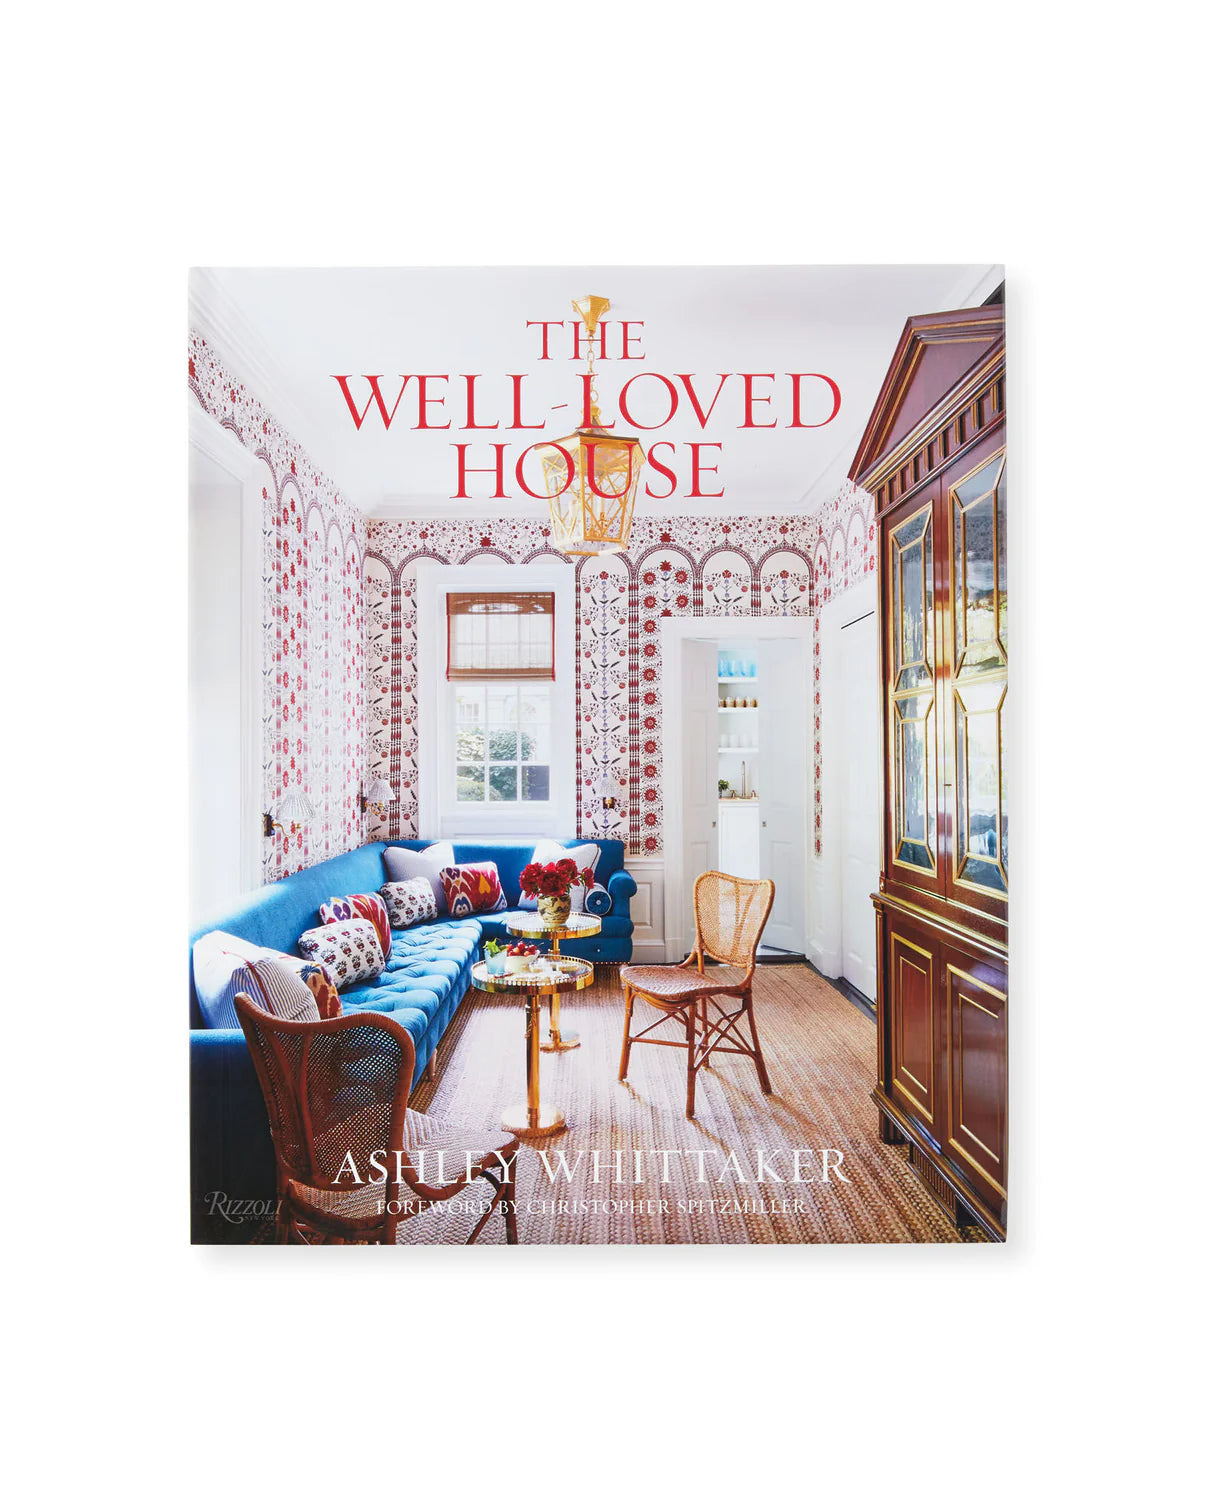 Book: The Well-Loved House